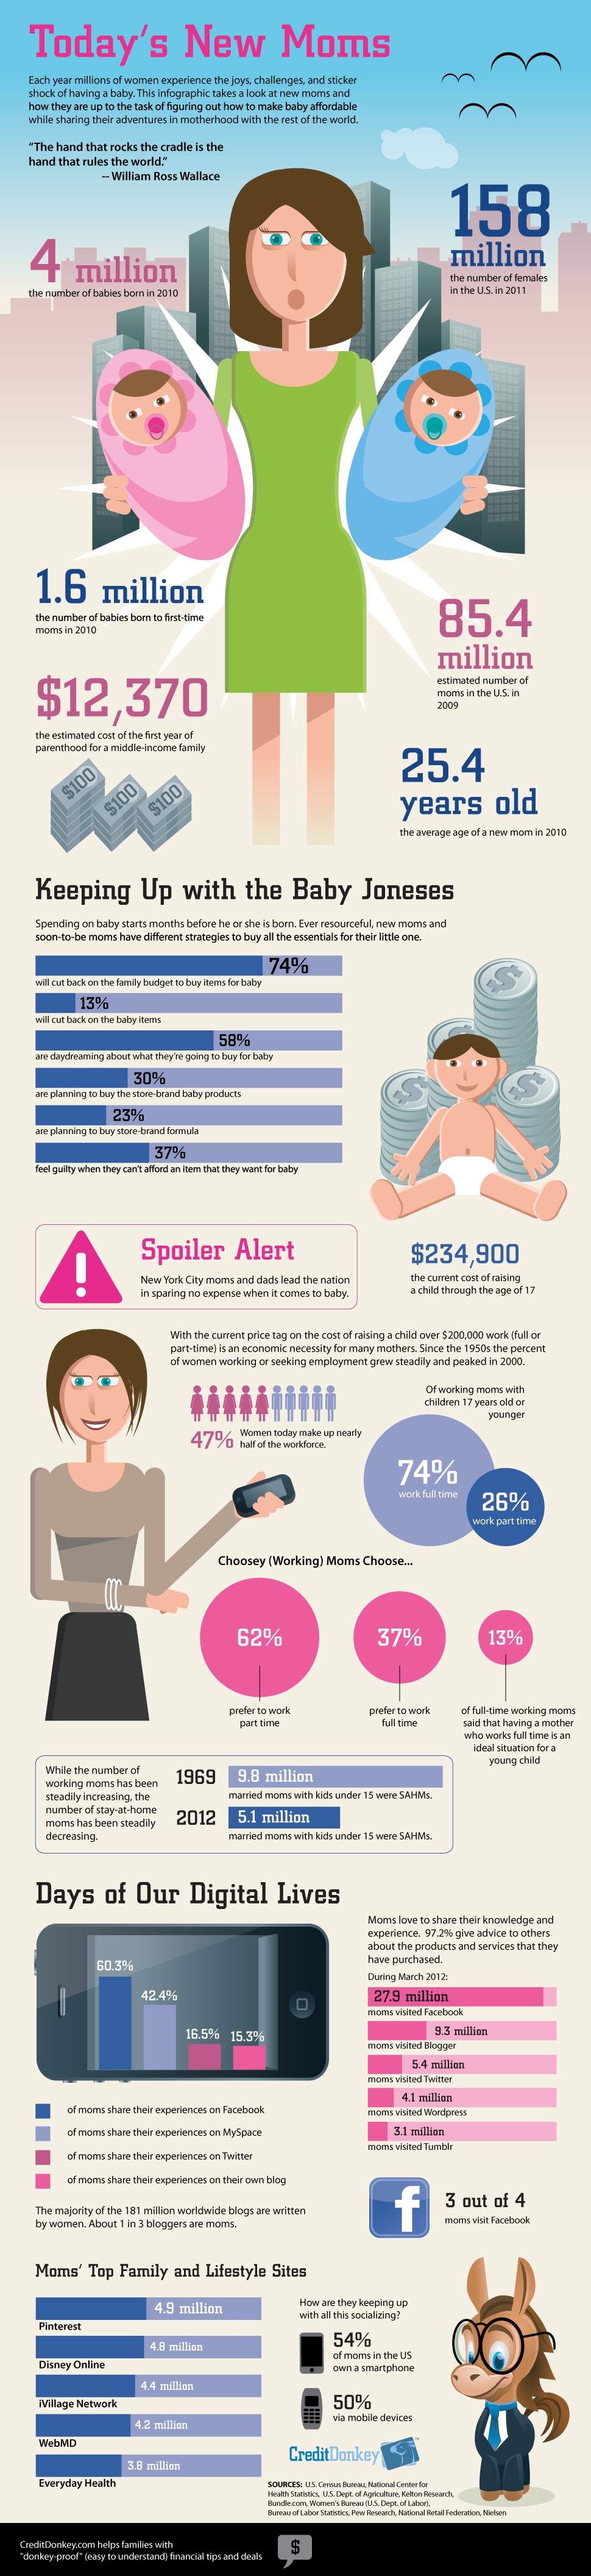 Today’s modern moms: Finance, lifestyle and digital statistics {Infographic} | The Momiverse